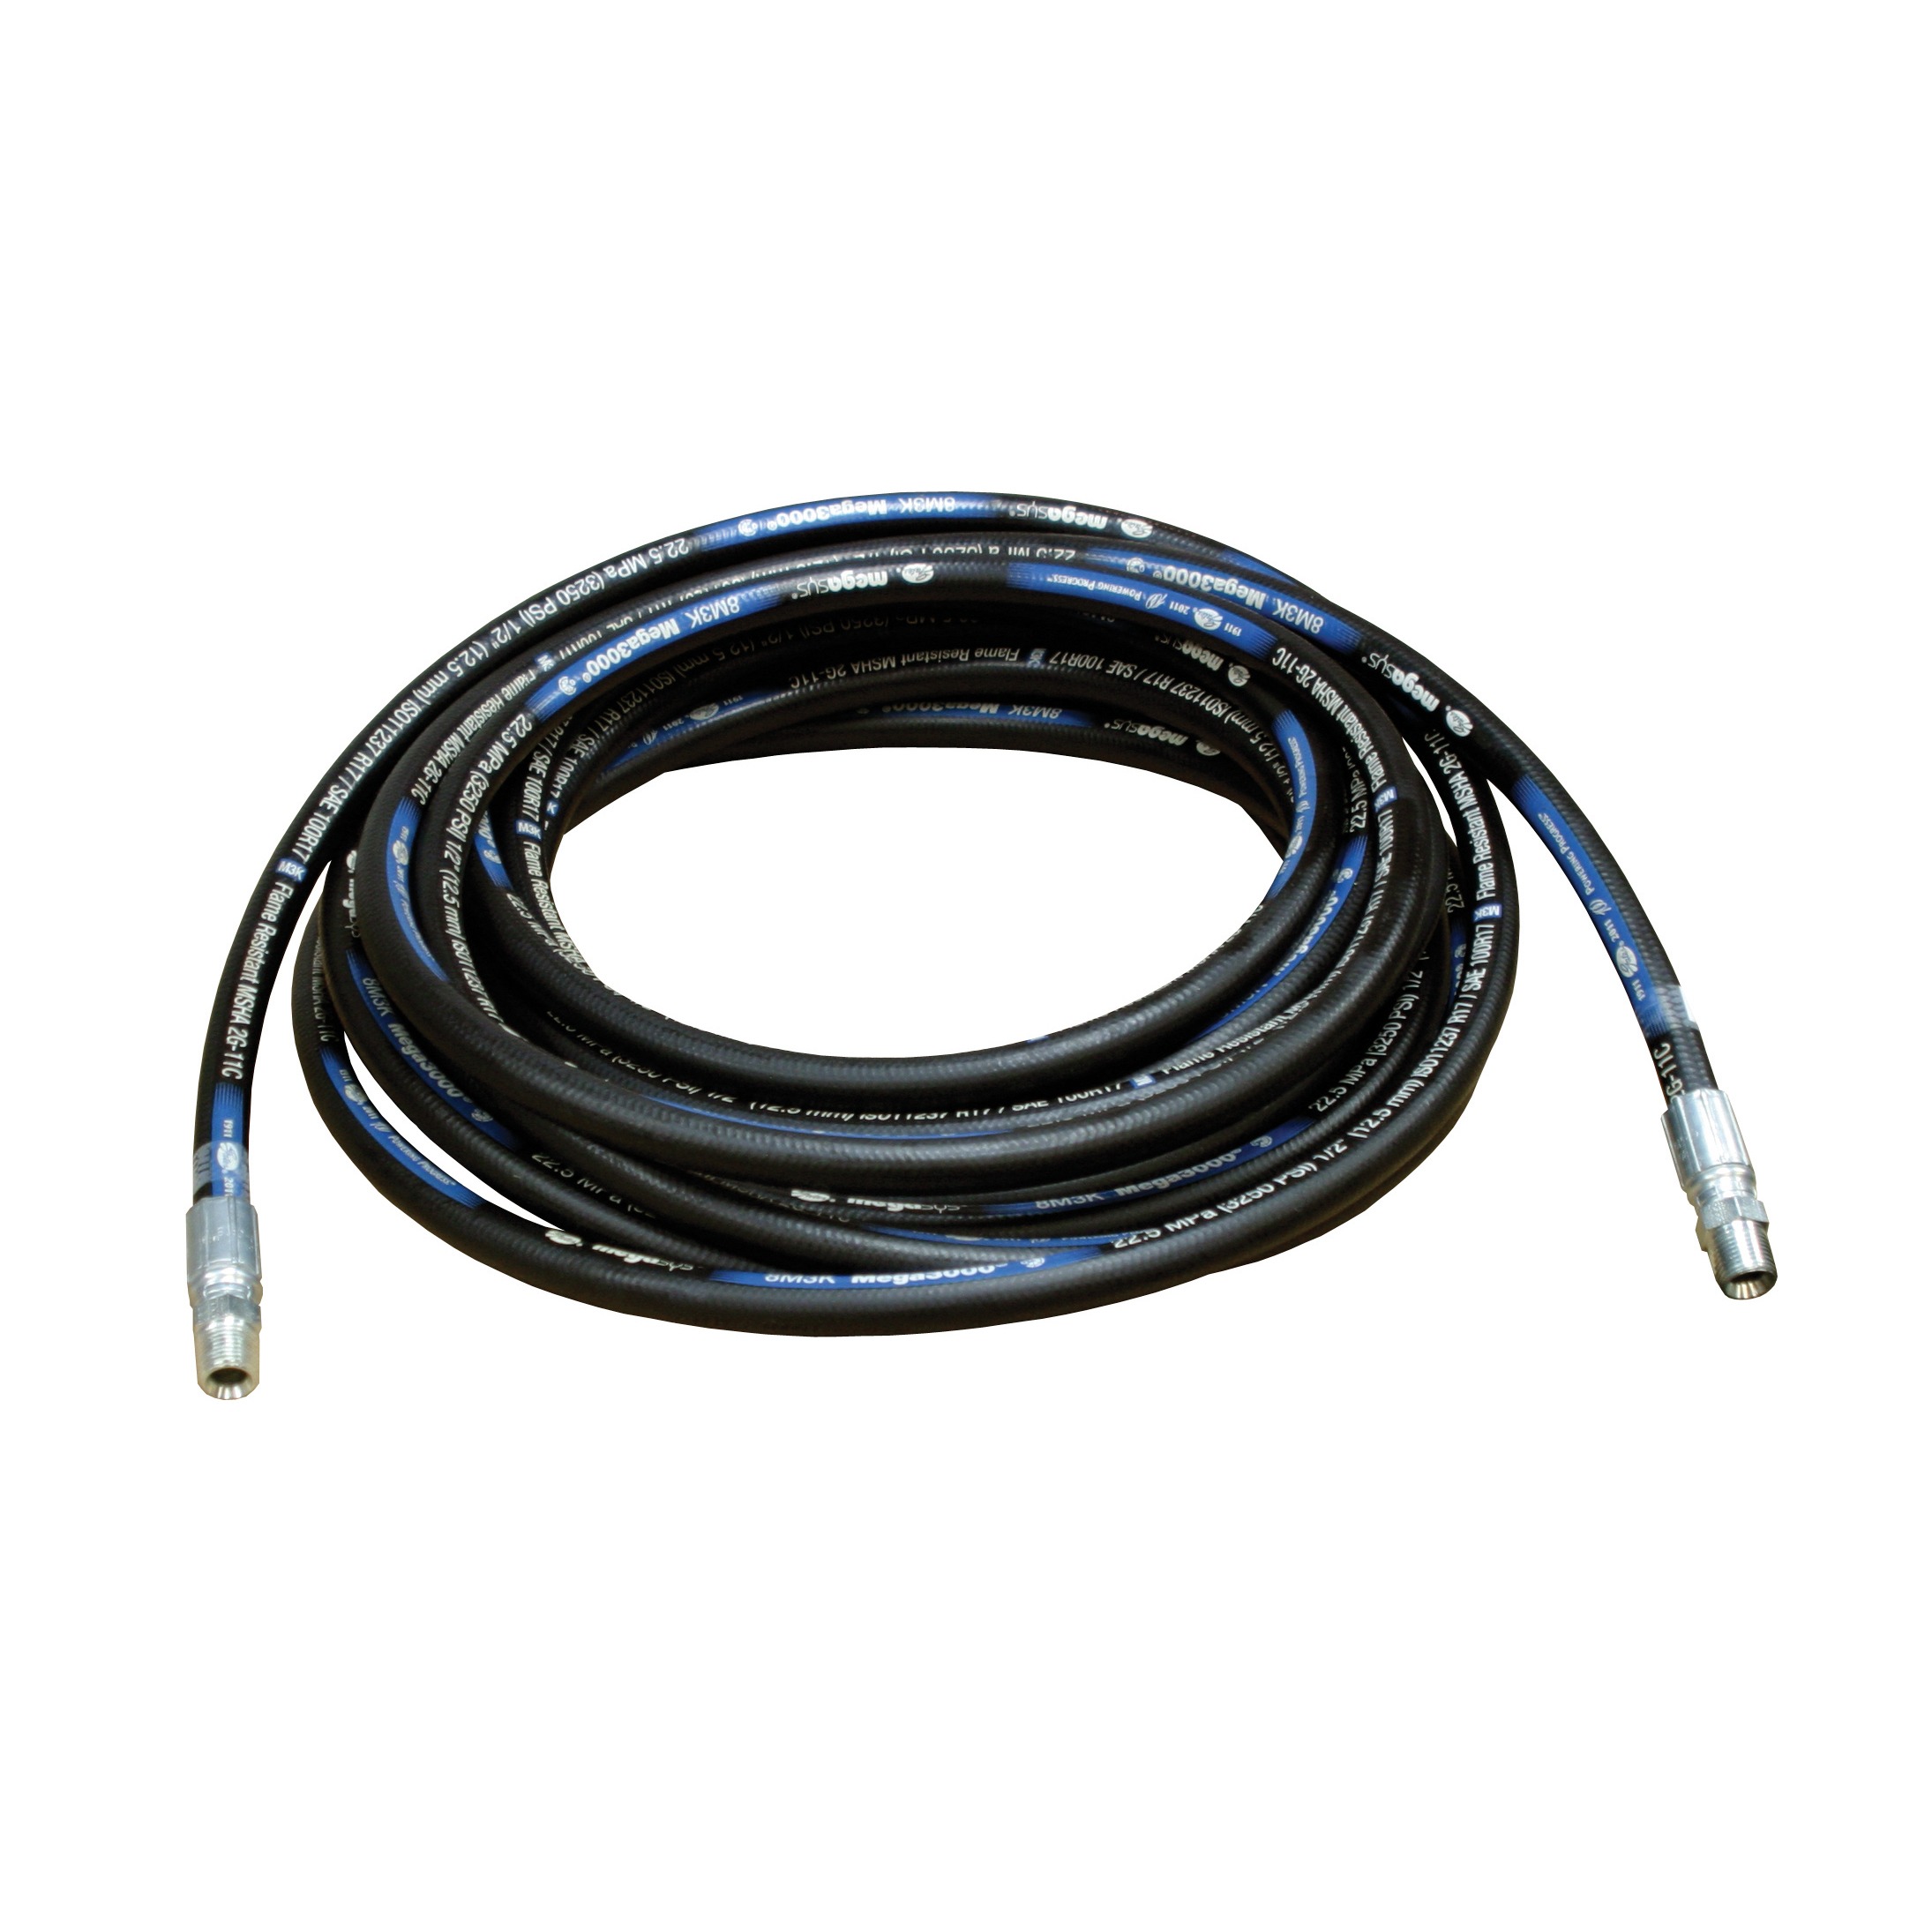 Reelcraft S8-260044 - 1/4 in. x 40 ft. High Pressure Grease Hose